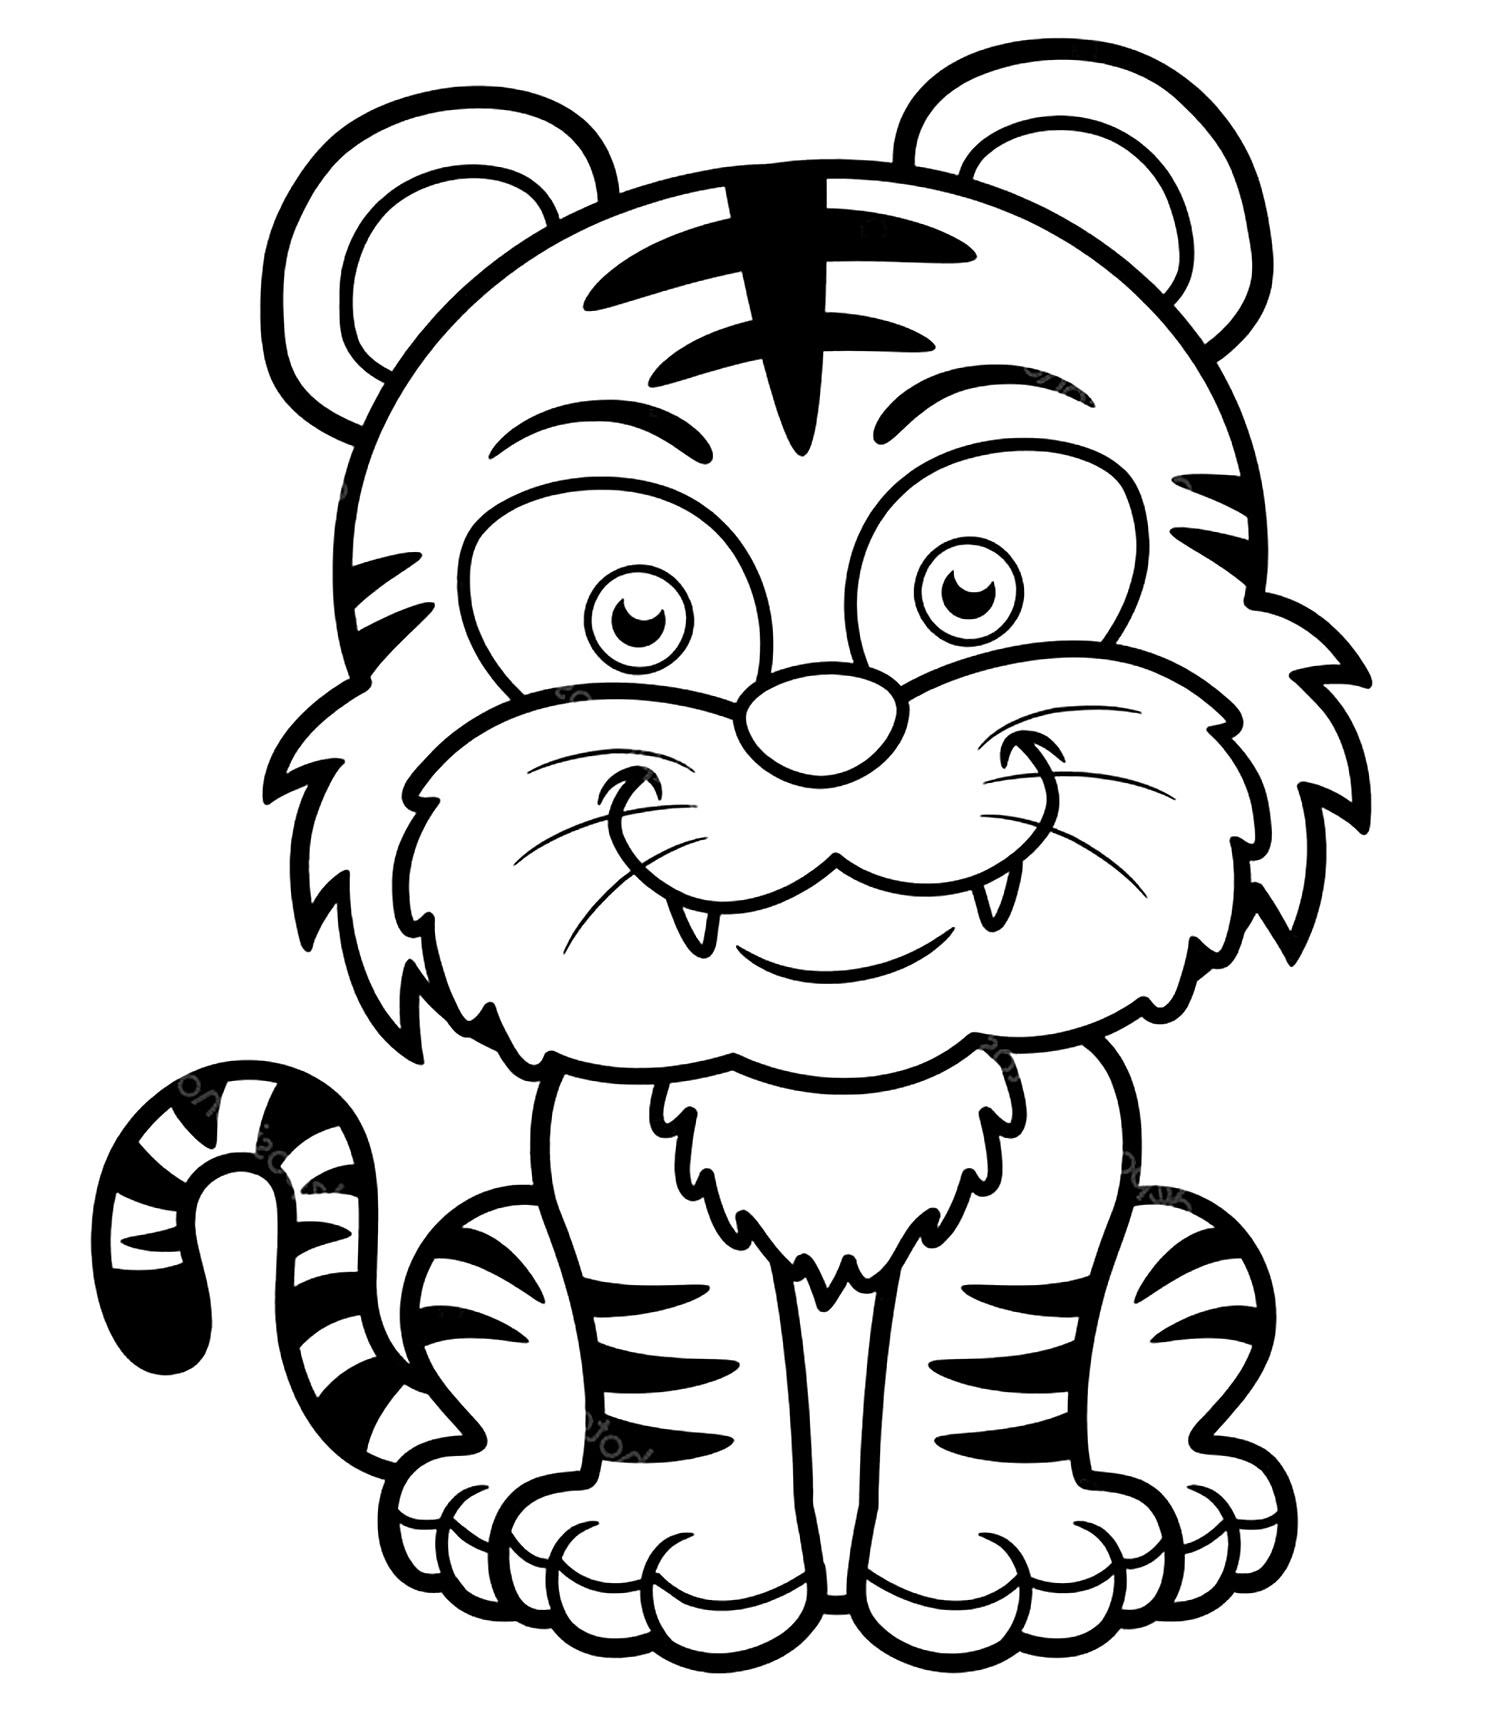 Tiger Coloring Pages Free Printable - Printable World Holiday